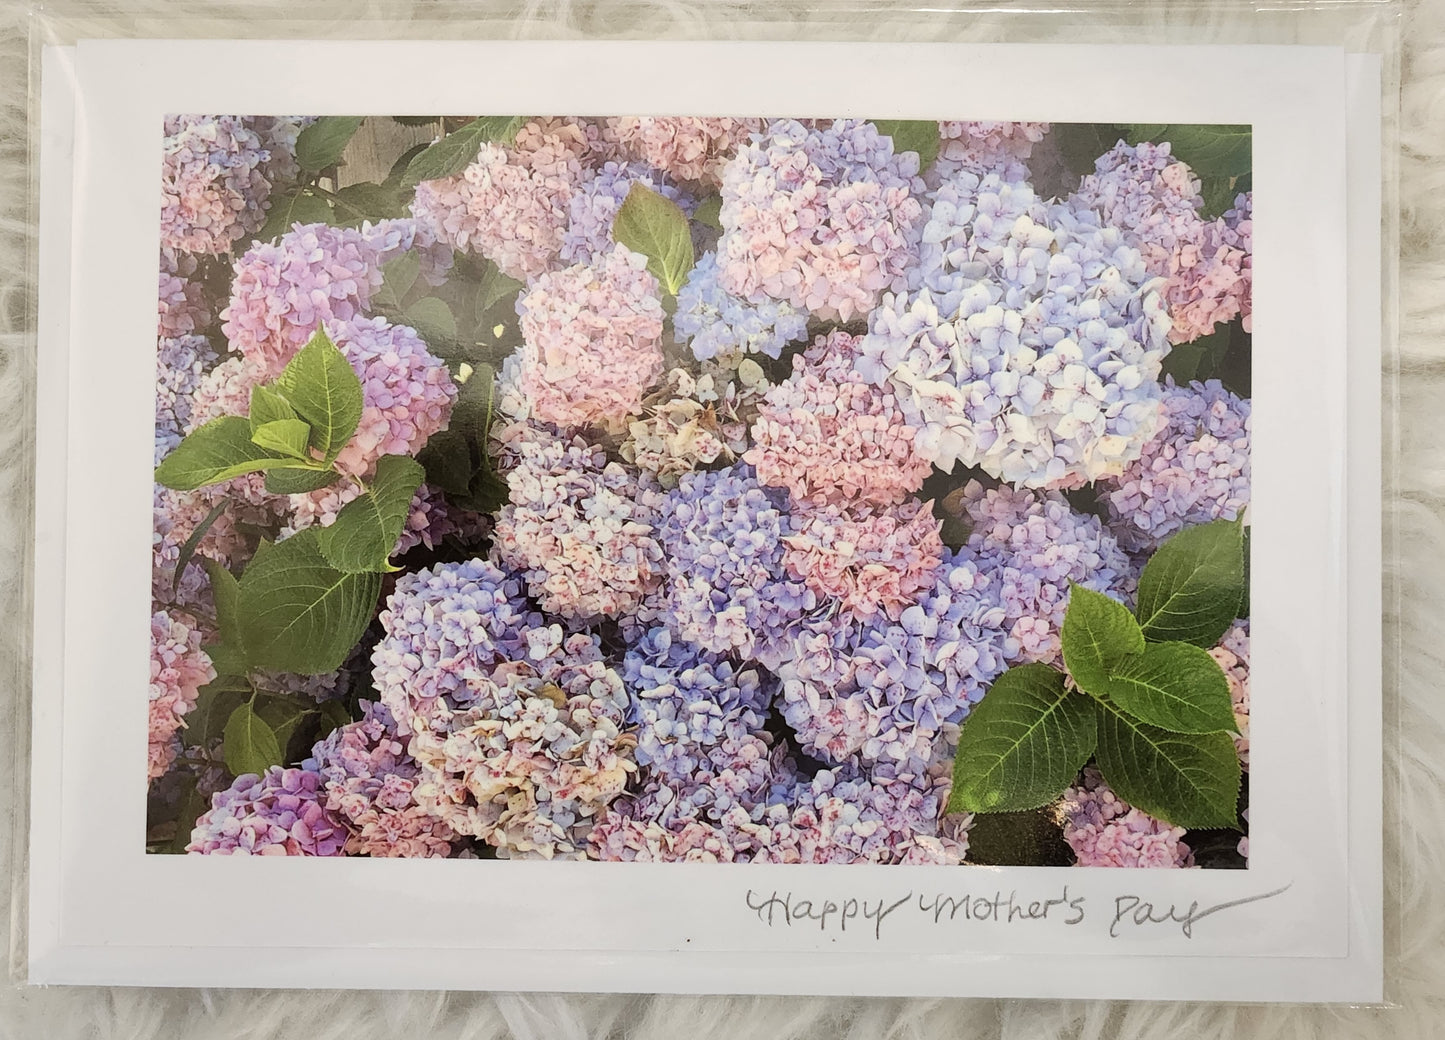 BARBSCARDS MOTHER'S DAY COLLECTION: HYDRANGEAS